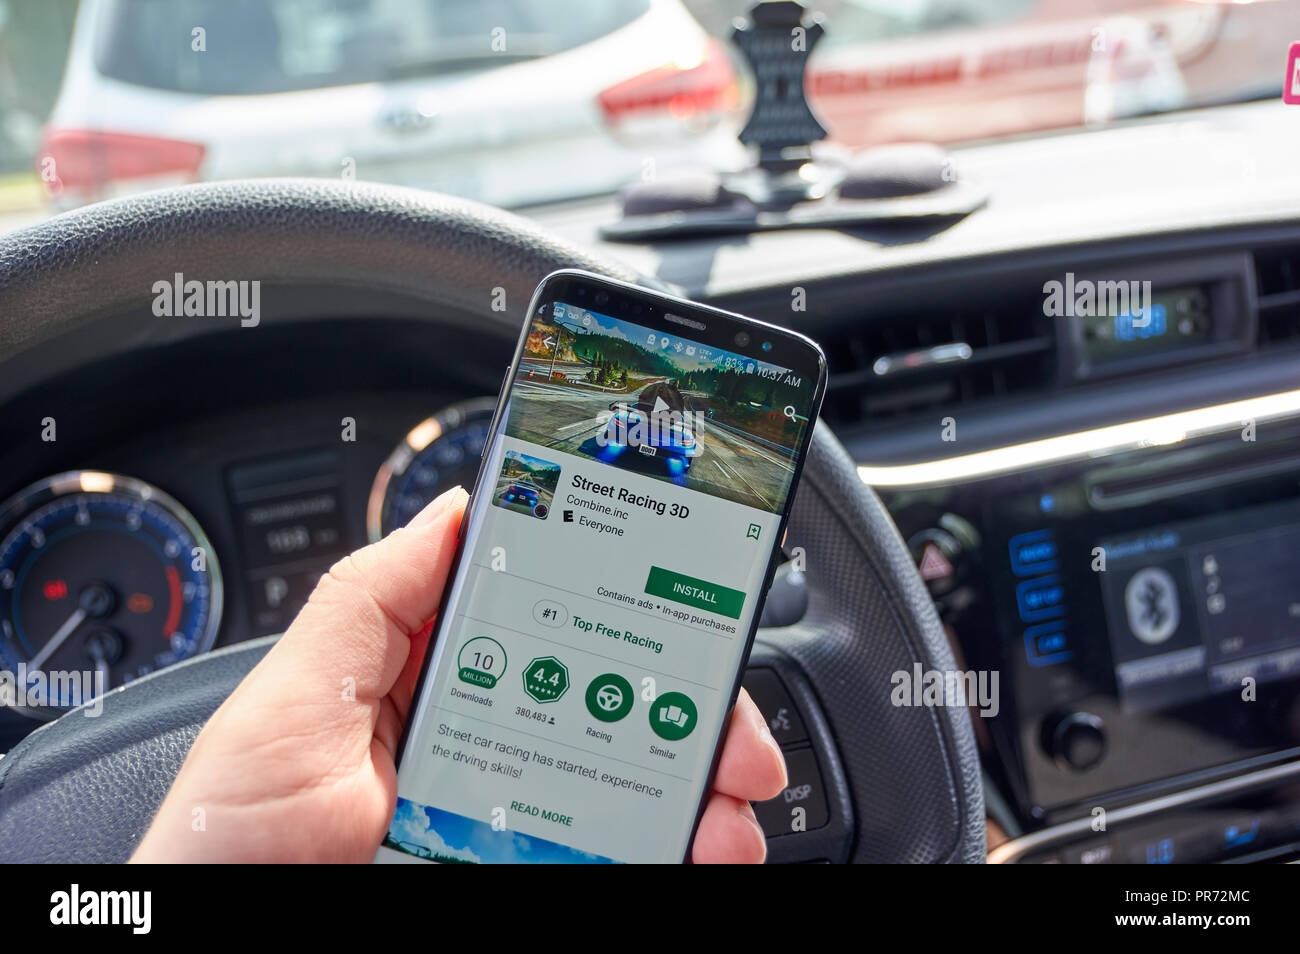 MONTREAL, CANADA - AUGUST 8, 2018: Street Racing 3d android mobile video game on Samsung s8 screen in a mans hand in a car. Stock Photo